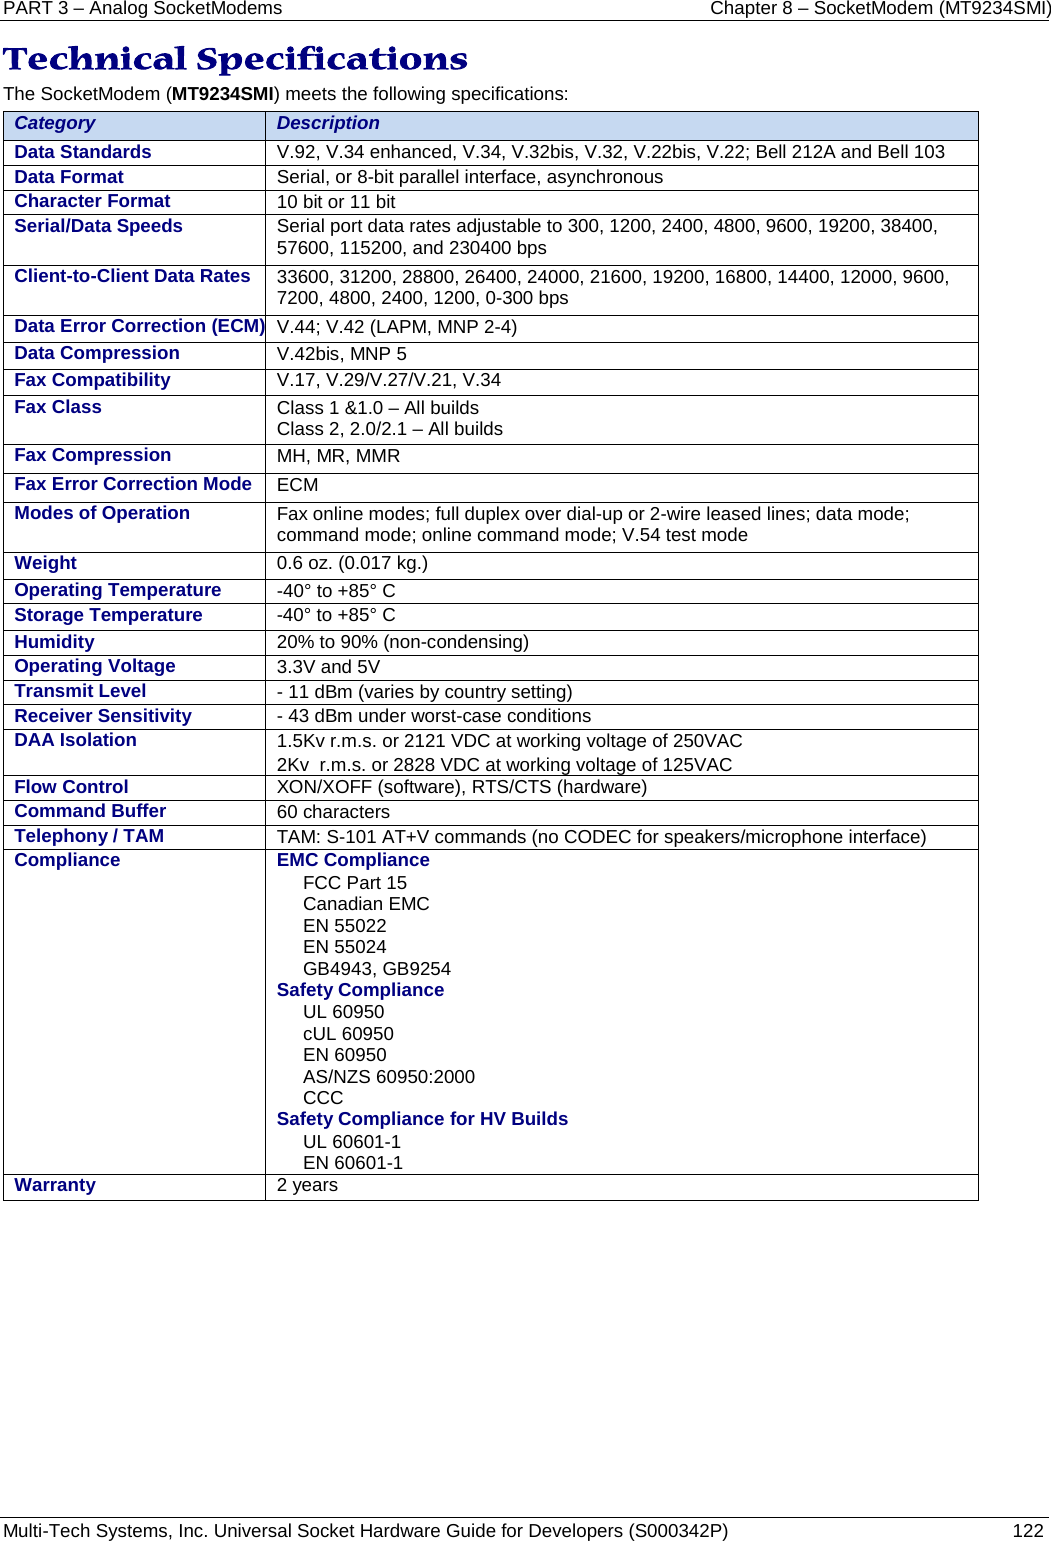 PART 3 – Analog SocketModems Chapter 8 – SocketModem (MT9234SMI) Multi-Tech Systems, Inc. Universal Socket Hardware Guide for Developers (S000342P)  122  Technical Specifications  The SocketModem (MT9234SMI) meets the following specifications:  Category Description Data Standards V.92, V.34 enhanced, V.34, V.32bis, V.32, V.22bis, V.22; Bell 212A and Bell 103 Data Format Serial, or 8-bit parallel interface, asynchronous Character Format 10 bit or 11 bit Serial/Data Speeds  Serial port data rates adjustable to 300, 1200, 2400, 4800, 9600, 19200, 38400, 57600, 115200, and 230400 bps Client-to-Client Data Rates 33600, 31200, 28800, 26400, 24000, 21600, 19200, 16800, 14400, 12000, 9600, 7200, 4800, 2400, 1200, 0-300 bps Data Error Correction (ECM) V.44; V.42 (LAPM, MNP 2-4) Data Compression V.42bis, MNP 5 Fax Compatibility V.17, V.29/V.27/V.21, V.34  Fax Class Class 1 &amp;1.0 – All builds Class 2, 2.0/2.1 – All builds Fax Compression MH, MR, MMR  Fax Error Correction Mode ECM Modes of Operation Fax online modes; full duplex over dial-up or 2-wire leased lines; data mode; command mode; online command mode; V.54 test mode Weight 0.6 oz. (0.017 kg.)  Operating Temperature  -40° to +85° C   Storage Temperature -40° to +85° C    Humidity 20% to 90% (non-condensing)  Operating Voltage 3.3V and 5V Transmit Level - 11 dBm (varies by country setting) Receiver Sensitivity - 43 dBm under worst-case conditions DAA Isolation   1.5Kv r.m.s. or 2121 VDC at working voltage of 250VAC 2Kv  r.m.s. or 2828 VDC at working voltage of 125VAC Flow Control XON/XOFF (software), RTS/CTS (hardware) Command Buffer 60 characters Telephony / TAM   TAM: S-101 AT+V commands (no CODEC for speakers/microphone interface) Compliance EMC Compliance FCC Part 15  Canadian EMC EN 55022  EN 55024 GB4943, GB9254 Safety Compliance UL 60950 cUL 60950 EN 60950 AS/NZS 60950:2000  CCC Safety Compliance for HV Builds UL 60601-1 EN 60601-1 Warranty  2 years    